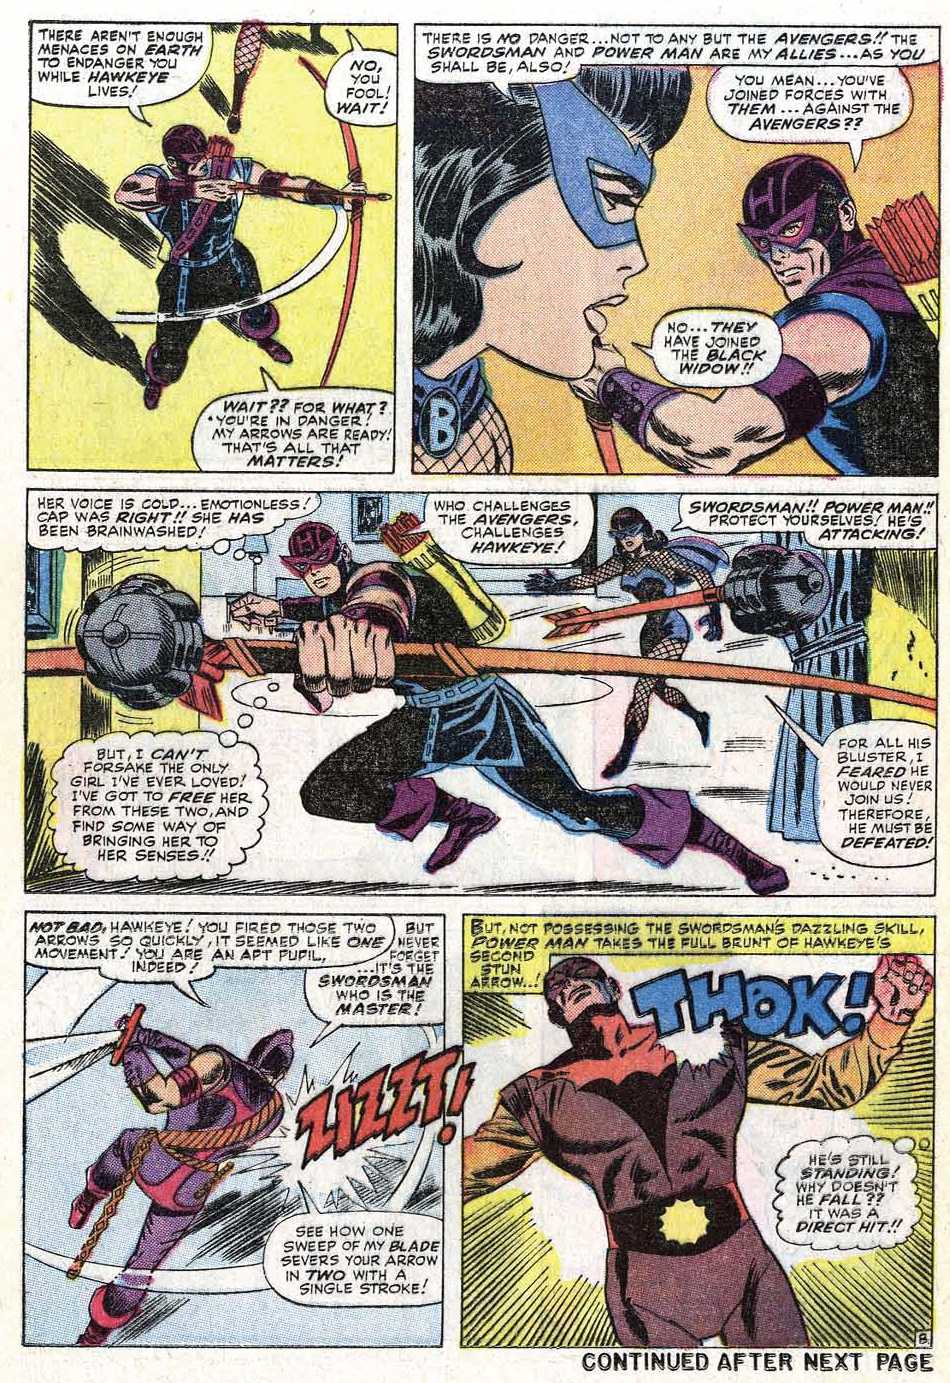 The Avengers (1963) 29 Page 11